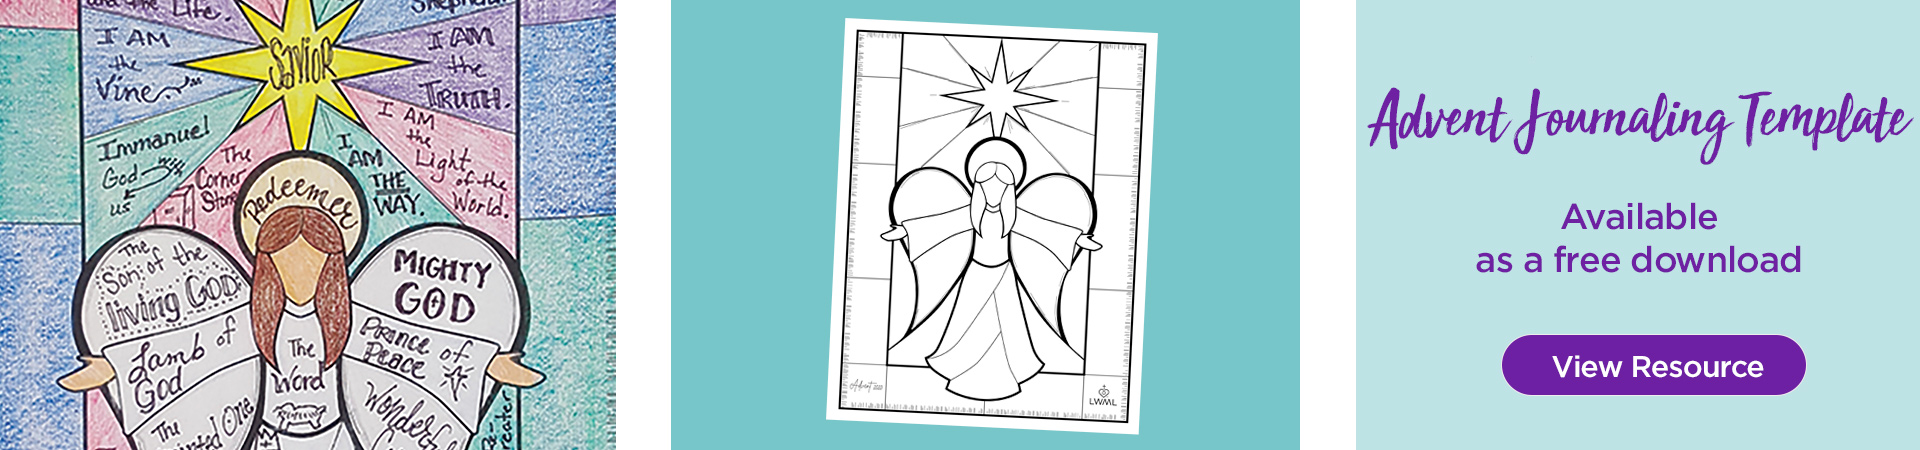 Advent Journaling Template: View Resource.